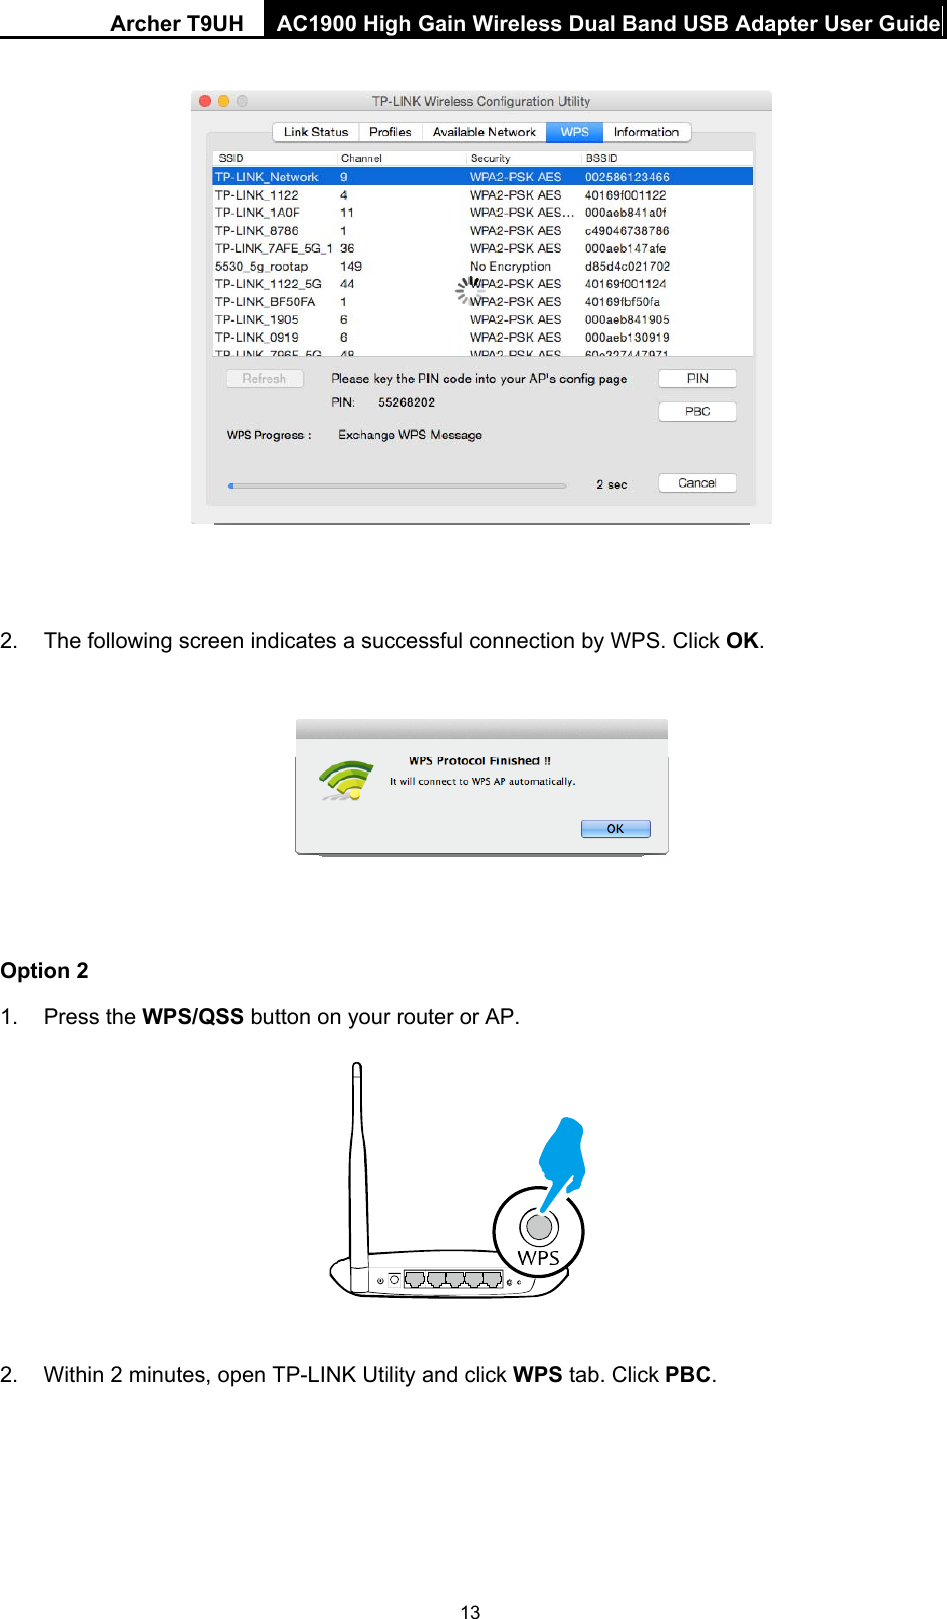 Archer T9UH  AC1900 High Gain Wireless Dual Band USB Adapter User Guide 13   2.  The following screen indicates a successful connection by WPS. Click OK.  Option 2 1. Press the WPS/QSS button on your router or AP.     2.  Within 2 minutes, open TP-LINK Utility and click WPS tab. Click PBC.  